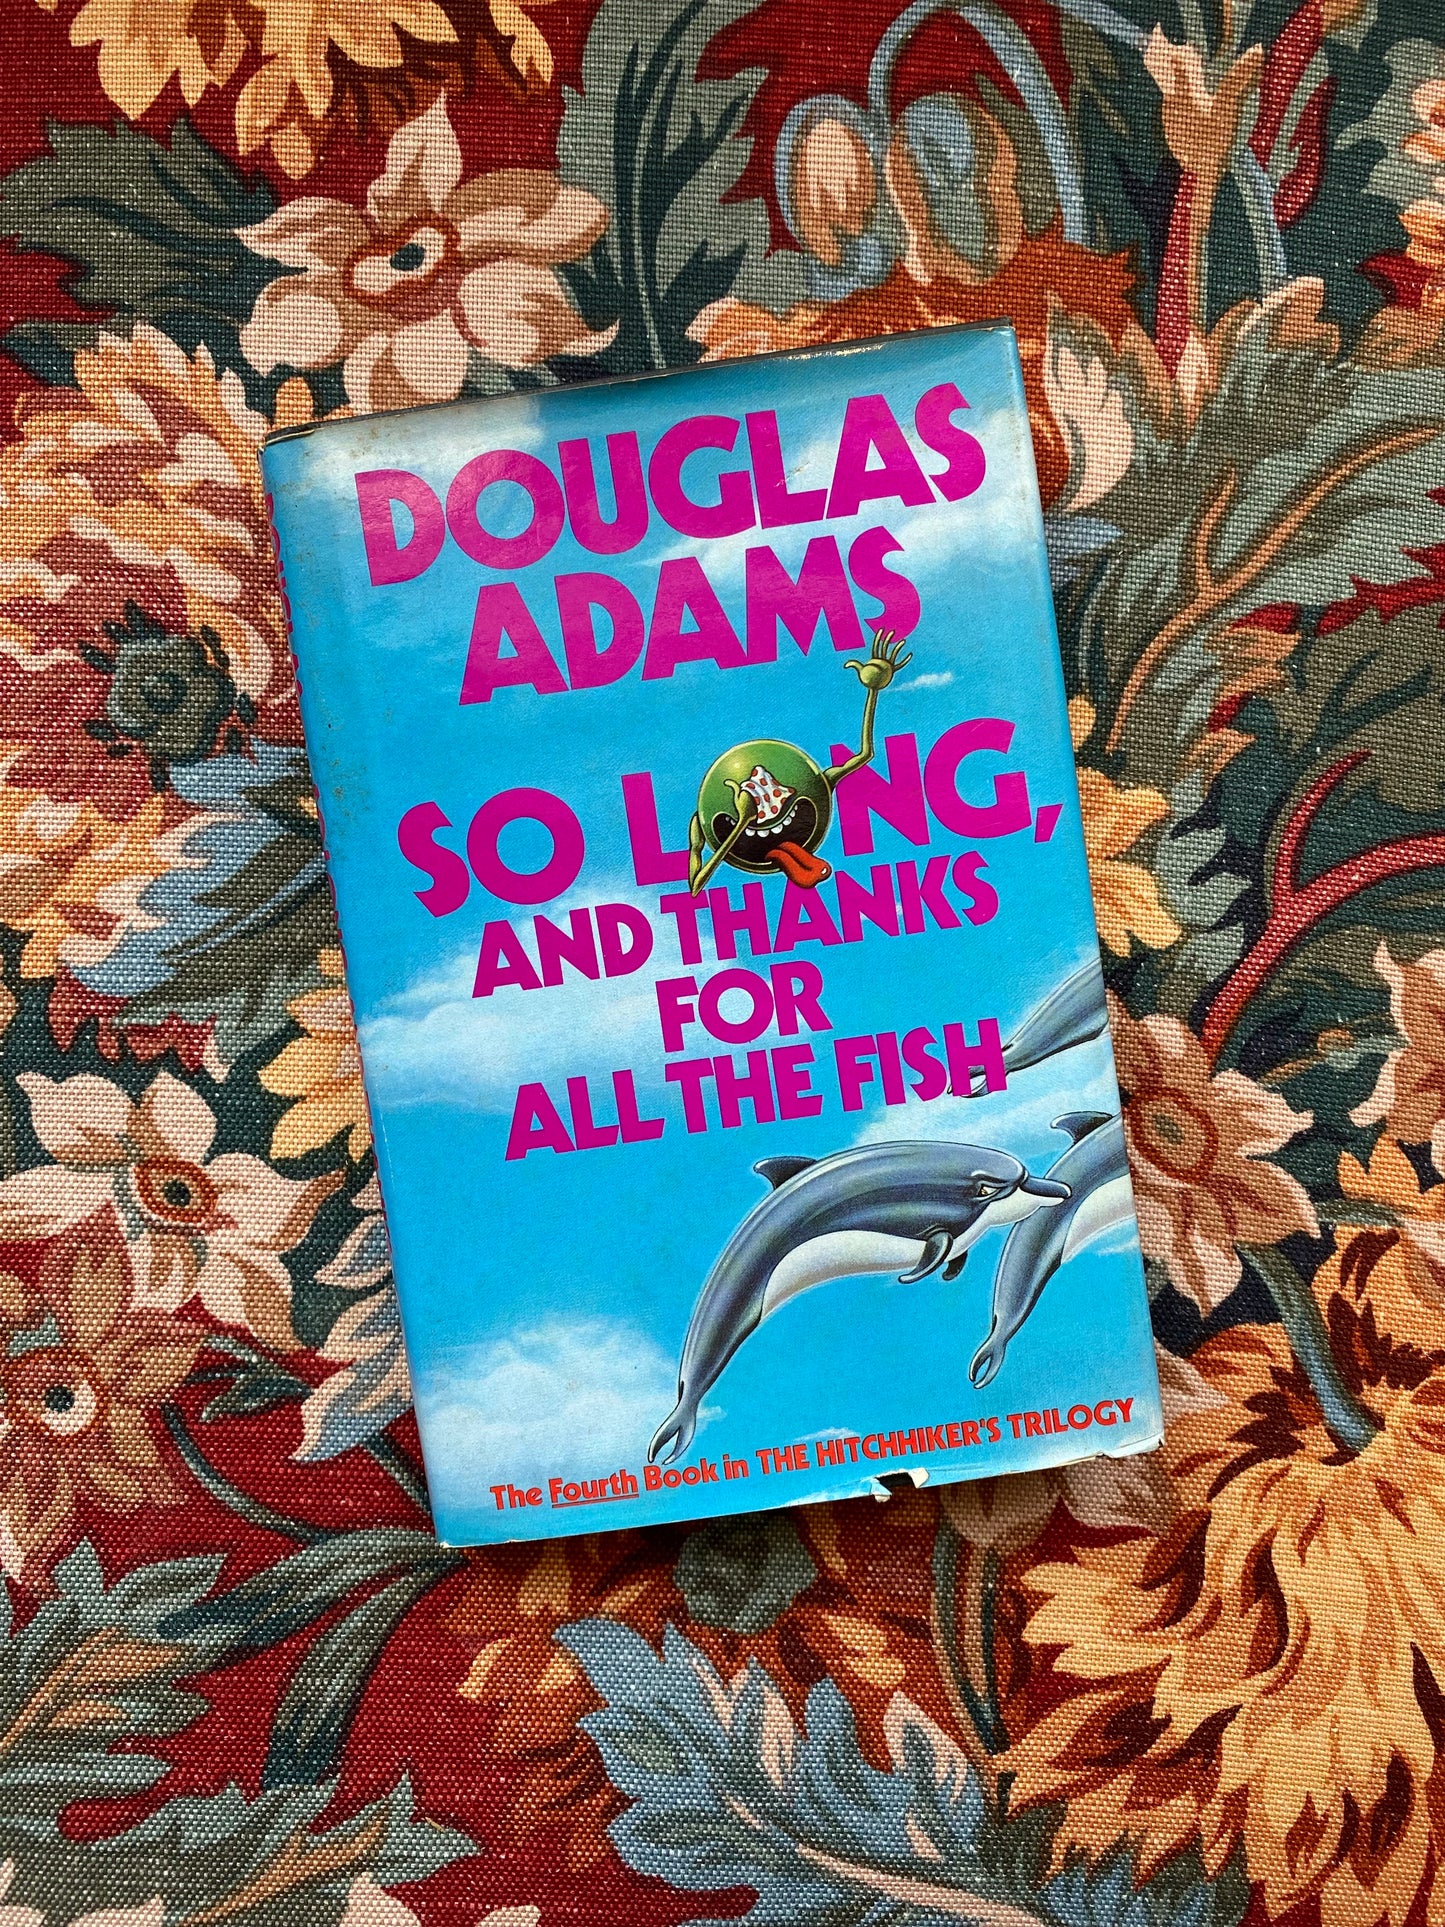 So Long and Thanks for all the Fish by Douglas Adams